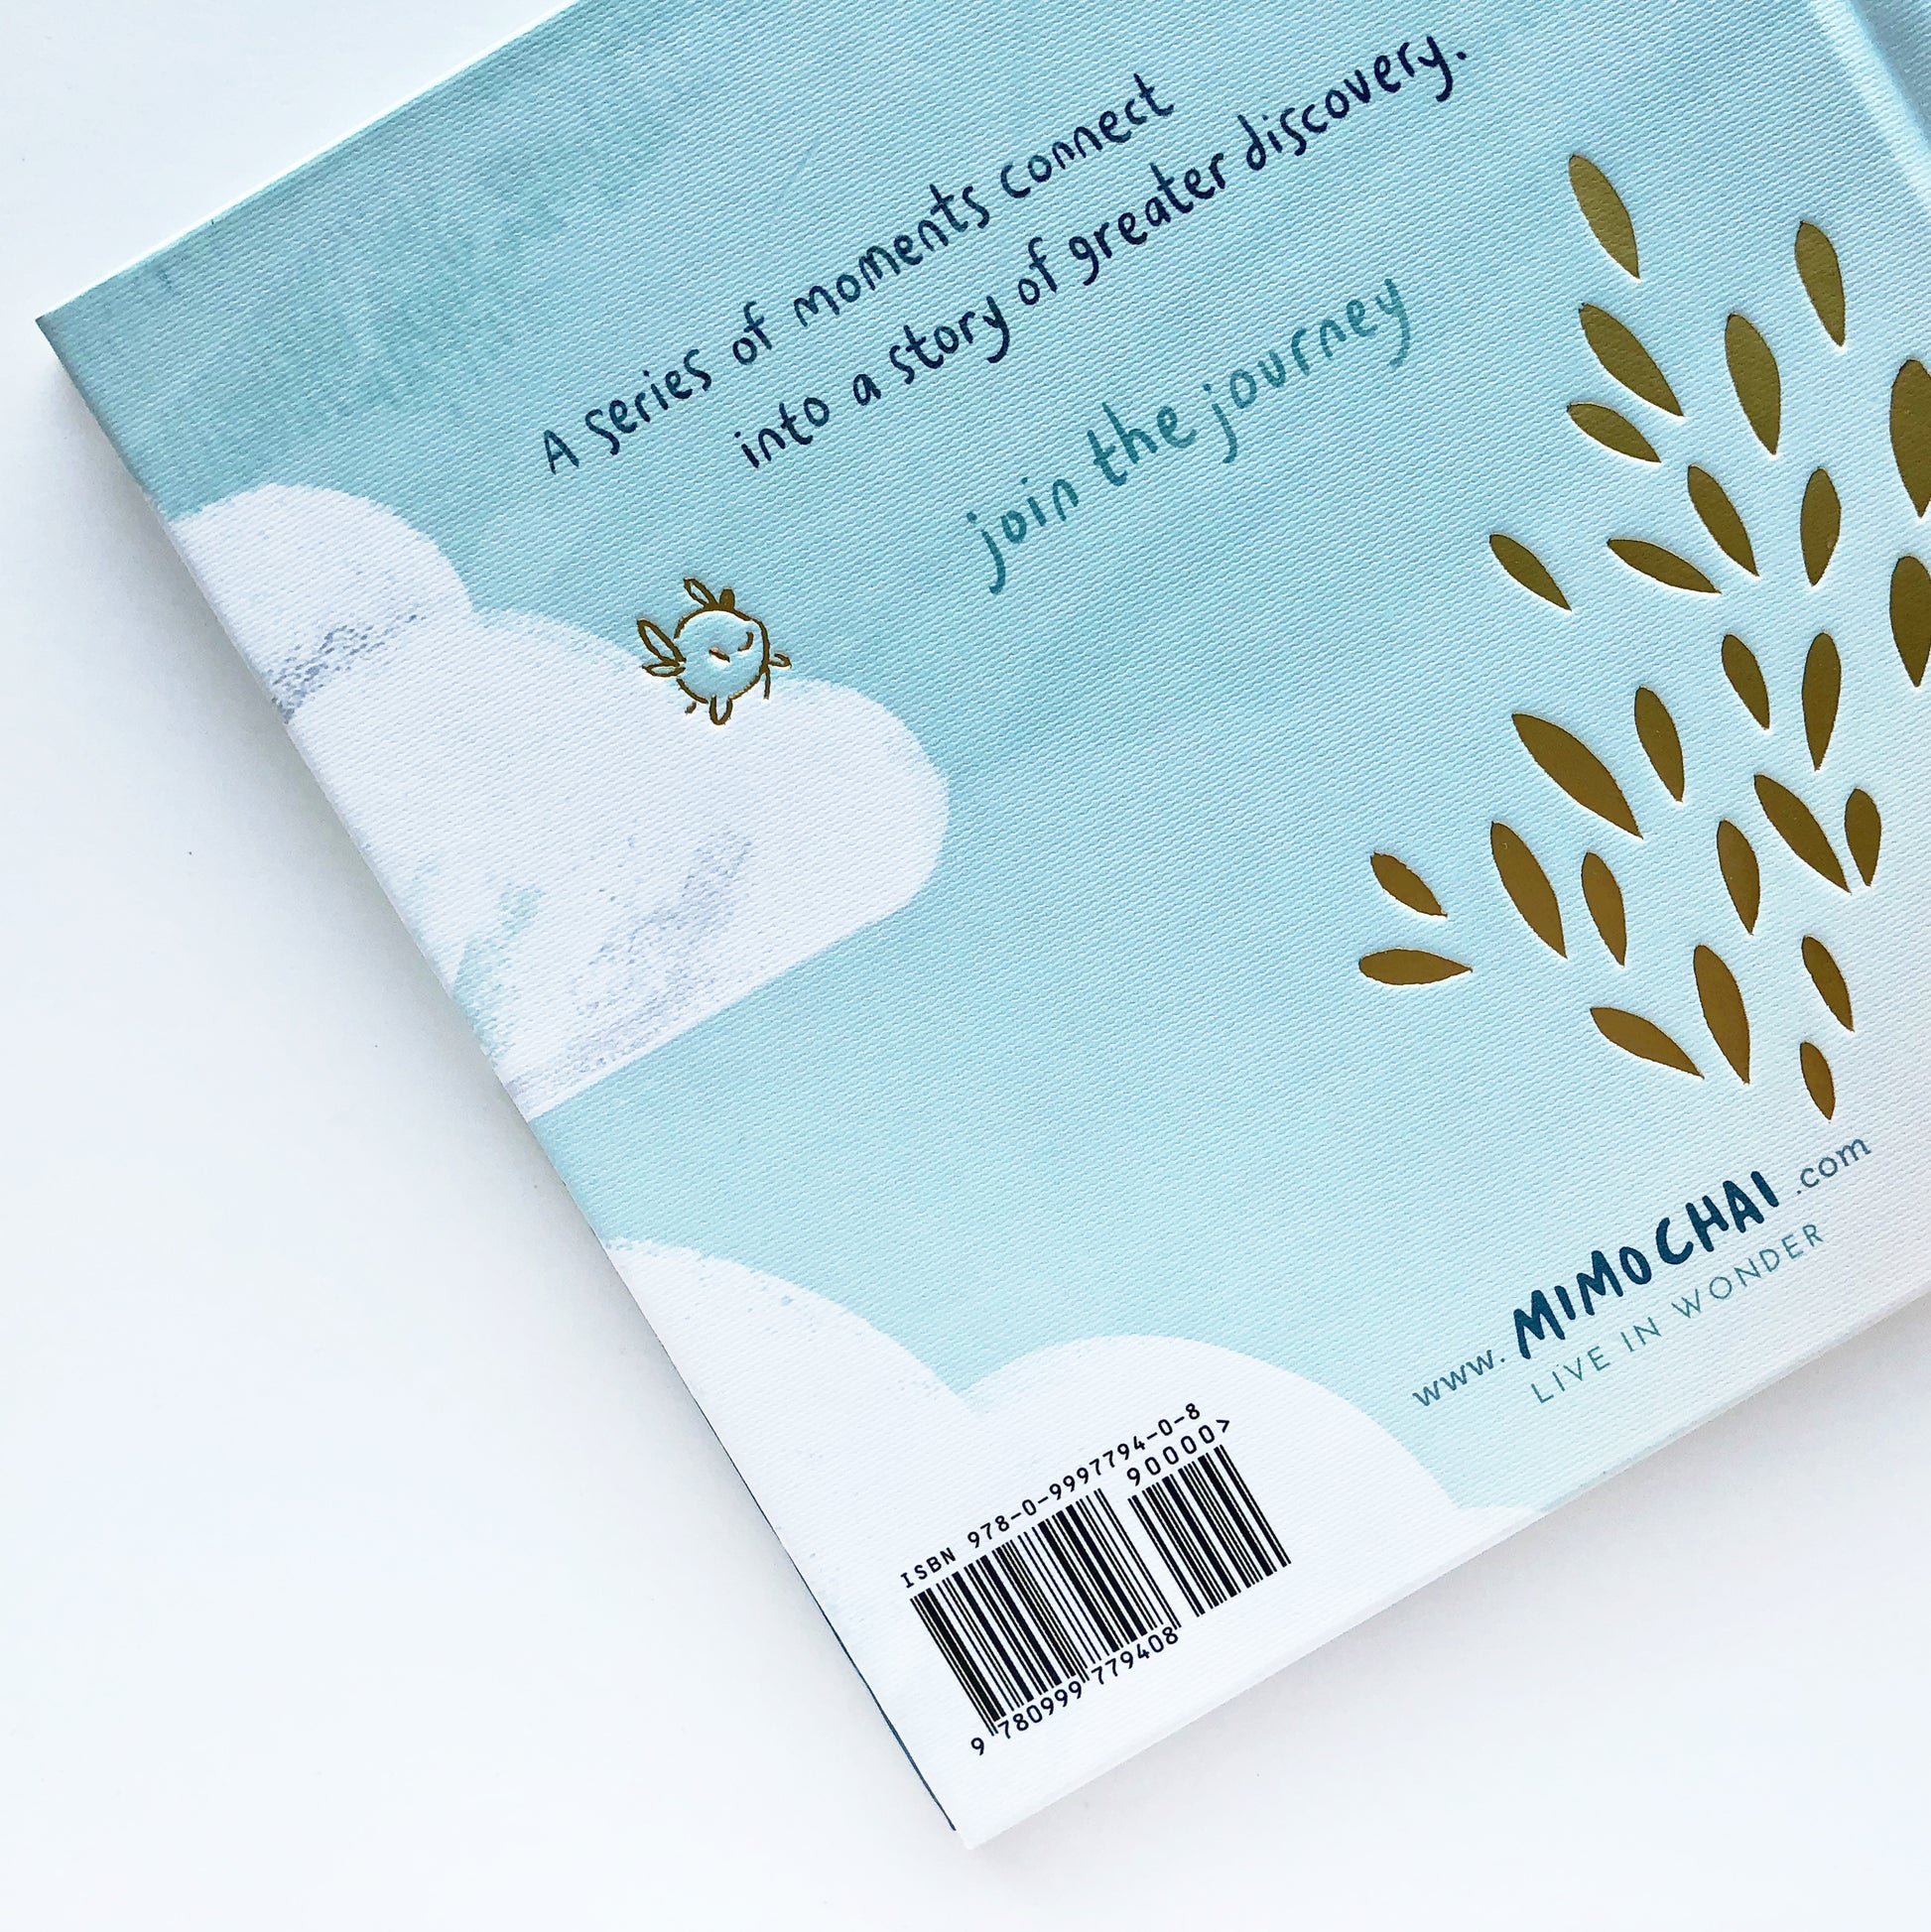 Back cover design for inspiring kid's adventure picture book, from Let's Go Explore by Mimochai